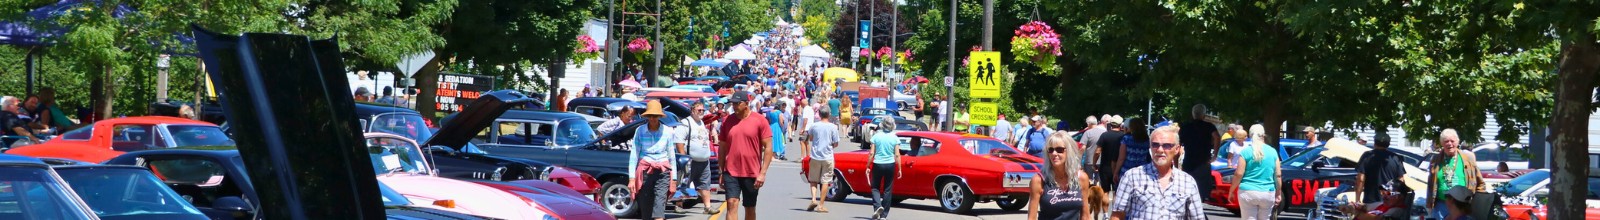 A large crowd of people walk through an large community event